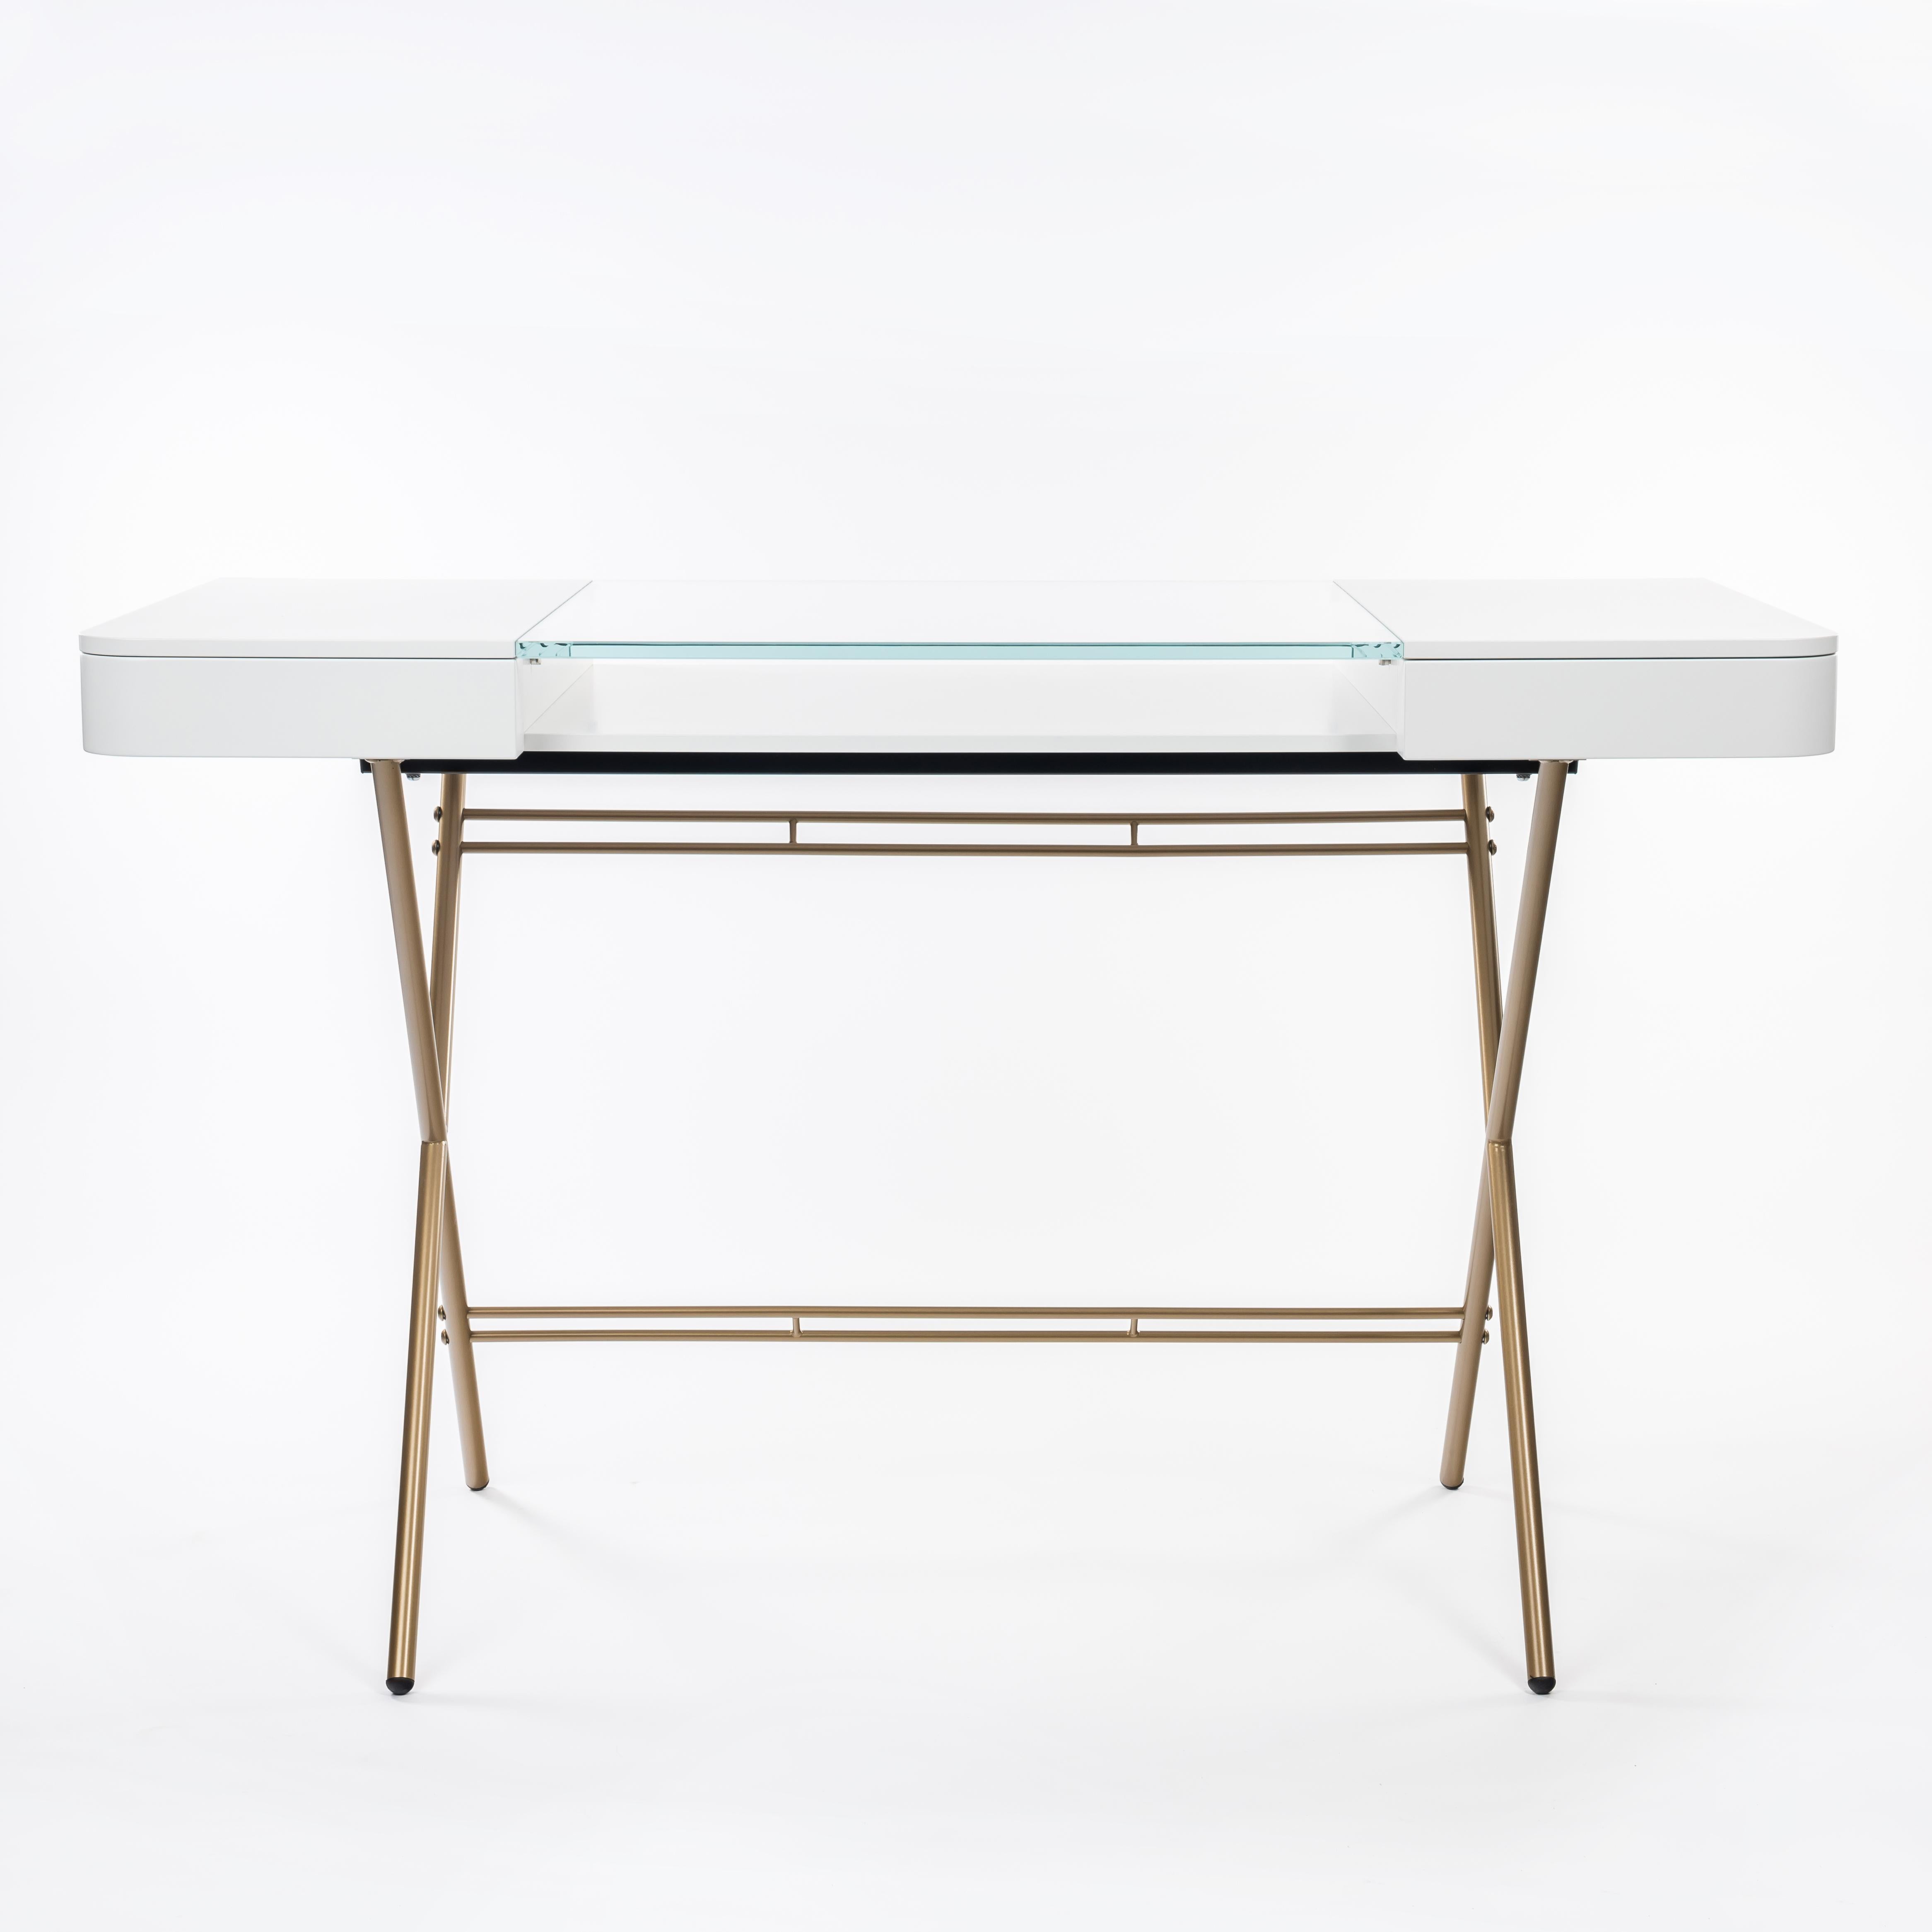 The Cosimo desk was designed by the architect Marco Zanuso Jr for luxury French furniture brand, Adentro Paris.
The desk is composed of a central extra clear glass panel with a storage below and has drawers on either side that provide ample storage